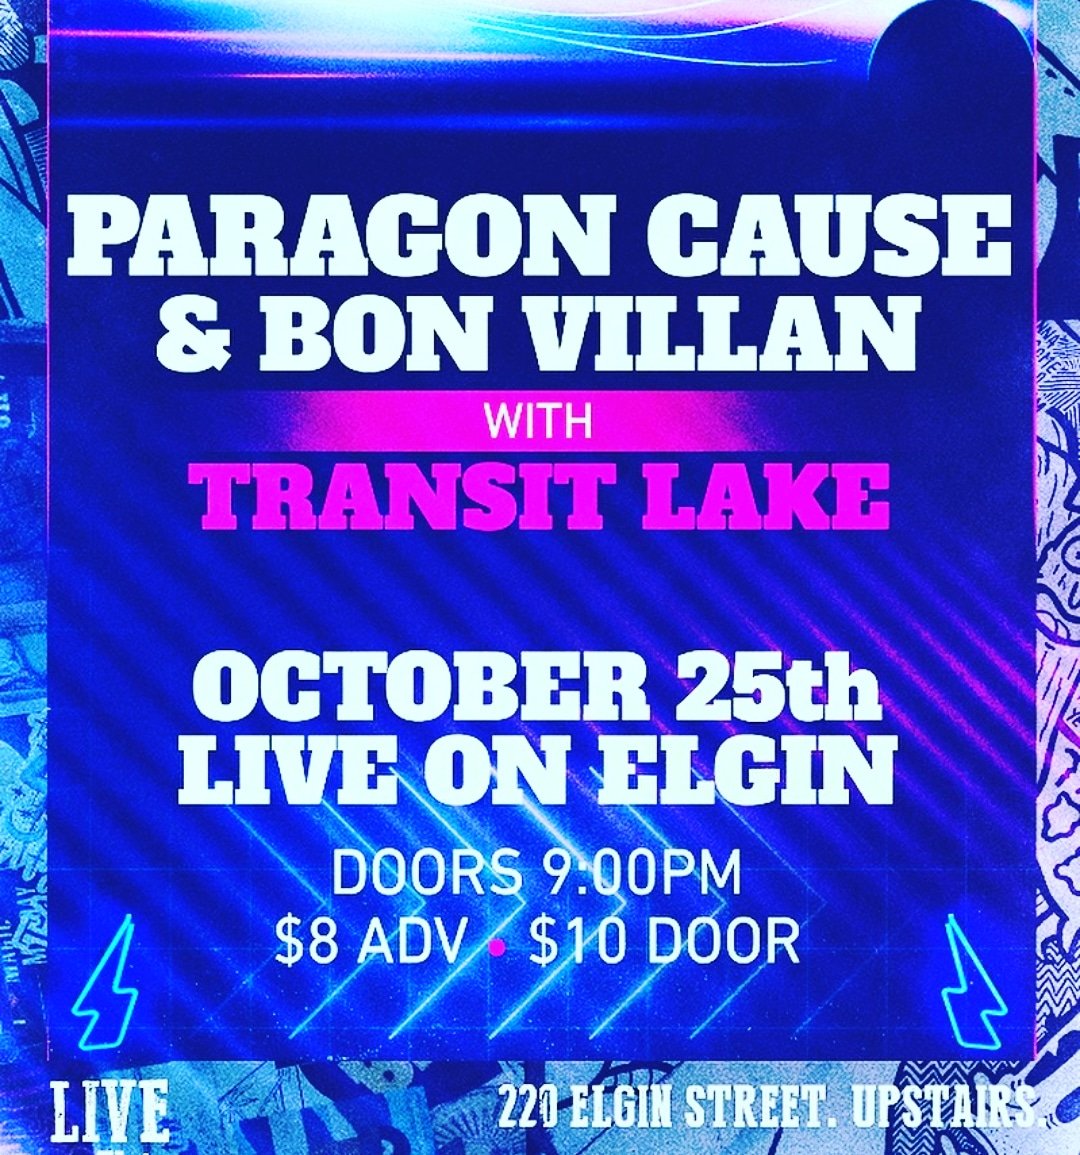 Tonight is our last show in Ottawa until 2020, so come out to @liveonelgin and blaze one for the Cause.  We anticipate an incredible night, come proove us wrong. @OttawaLiveCKCU @livemusiclov613 @localottawalive  @IndieCityMad @cbcallinaday @LiveMusicOttawa #livemusic #ottawa